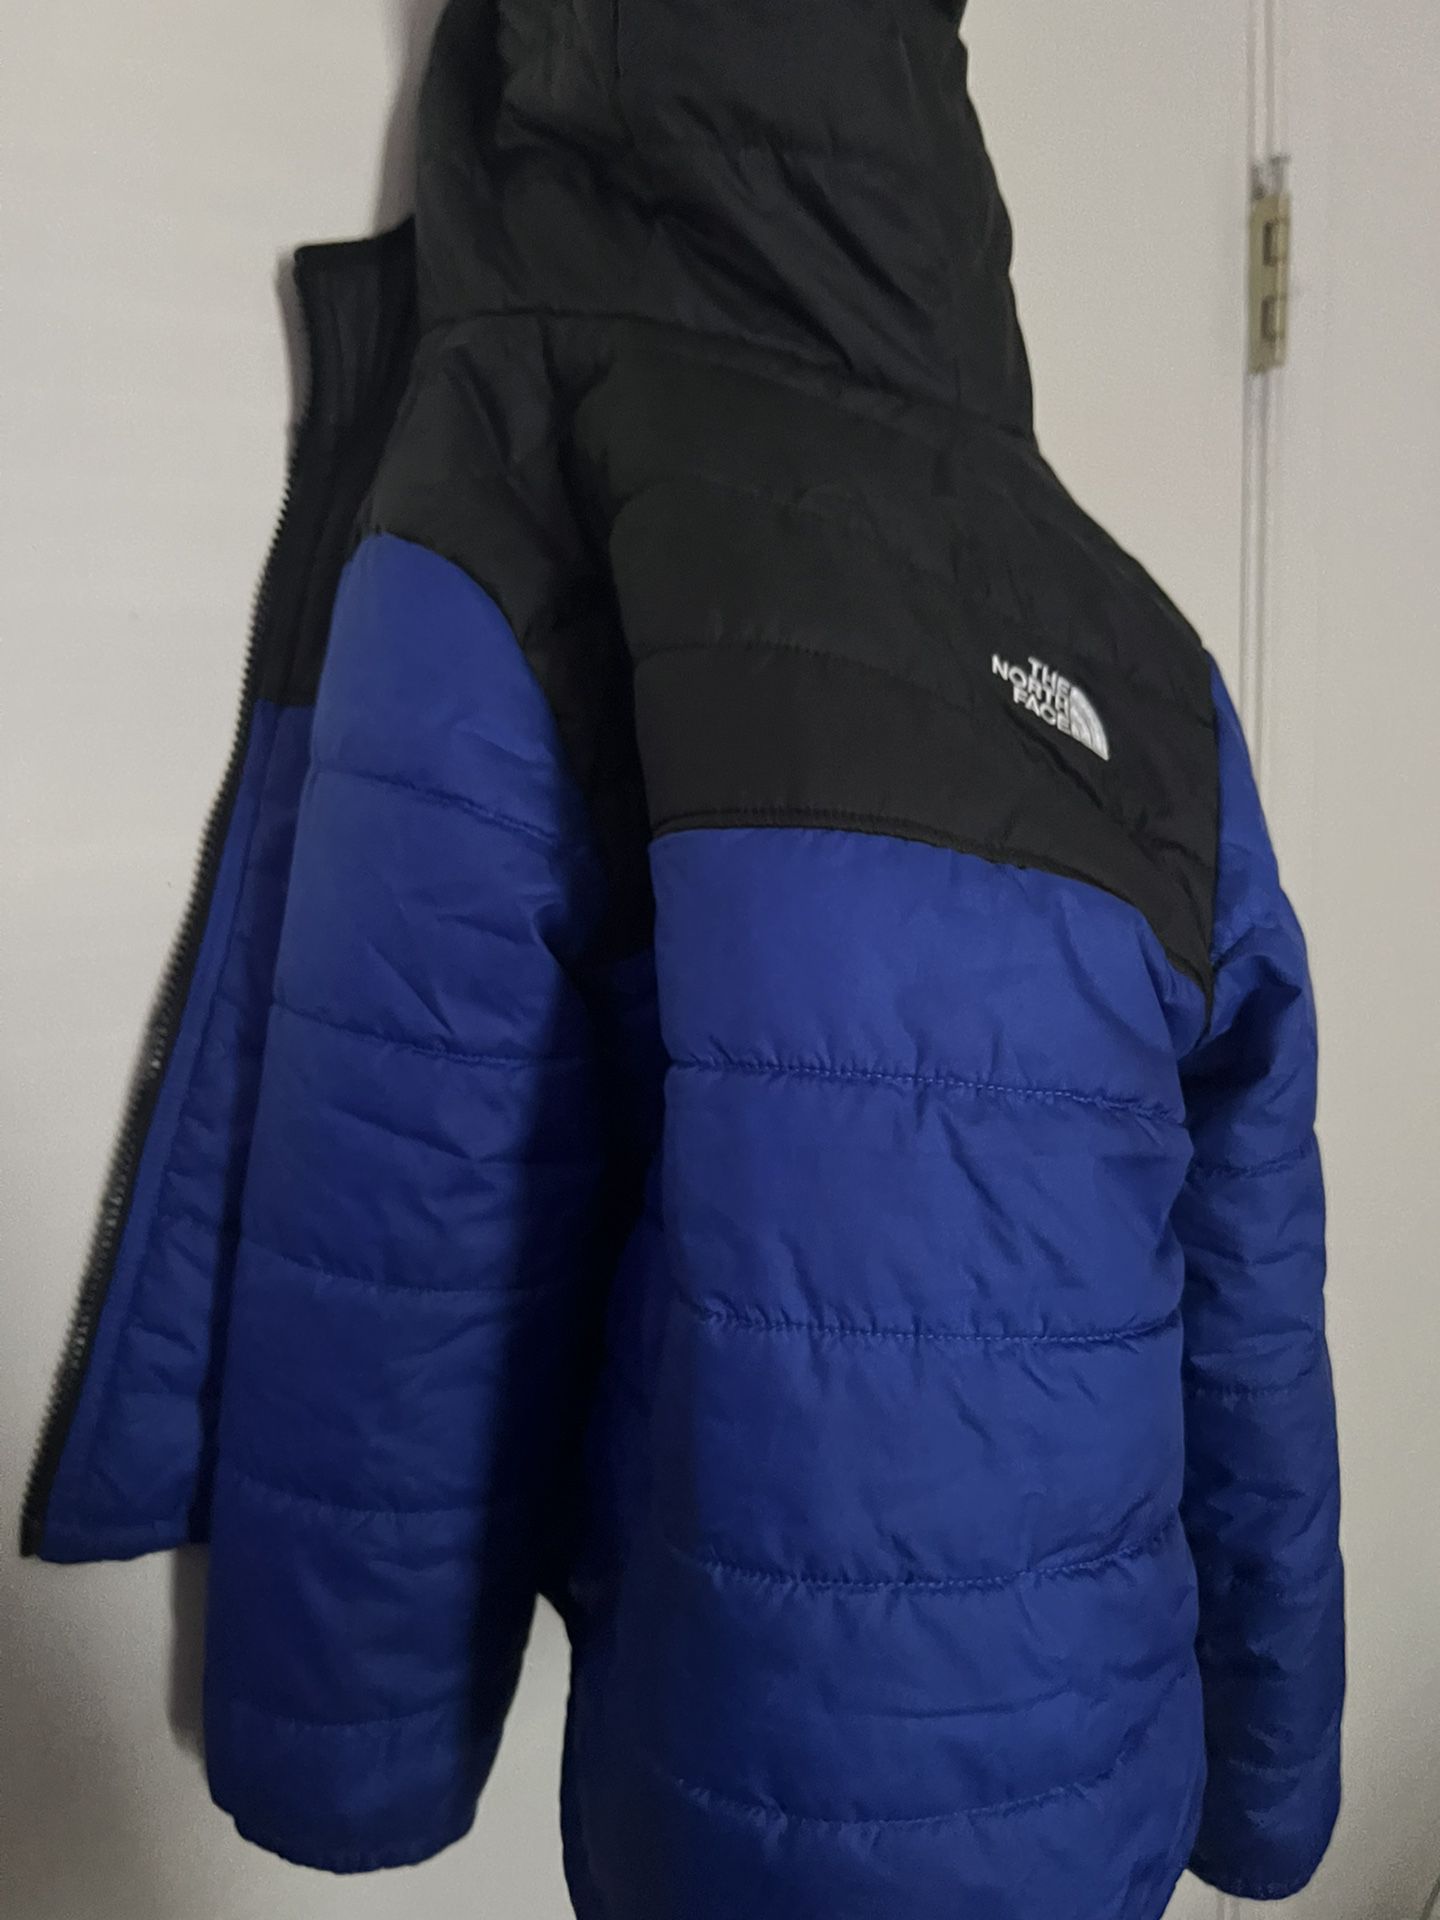 North face Toddler Coat Size 4t